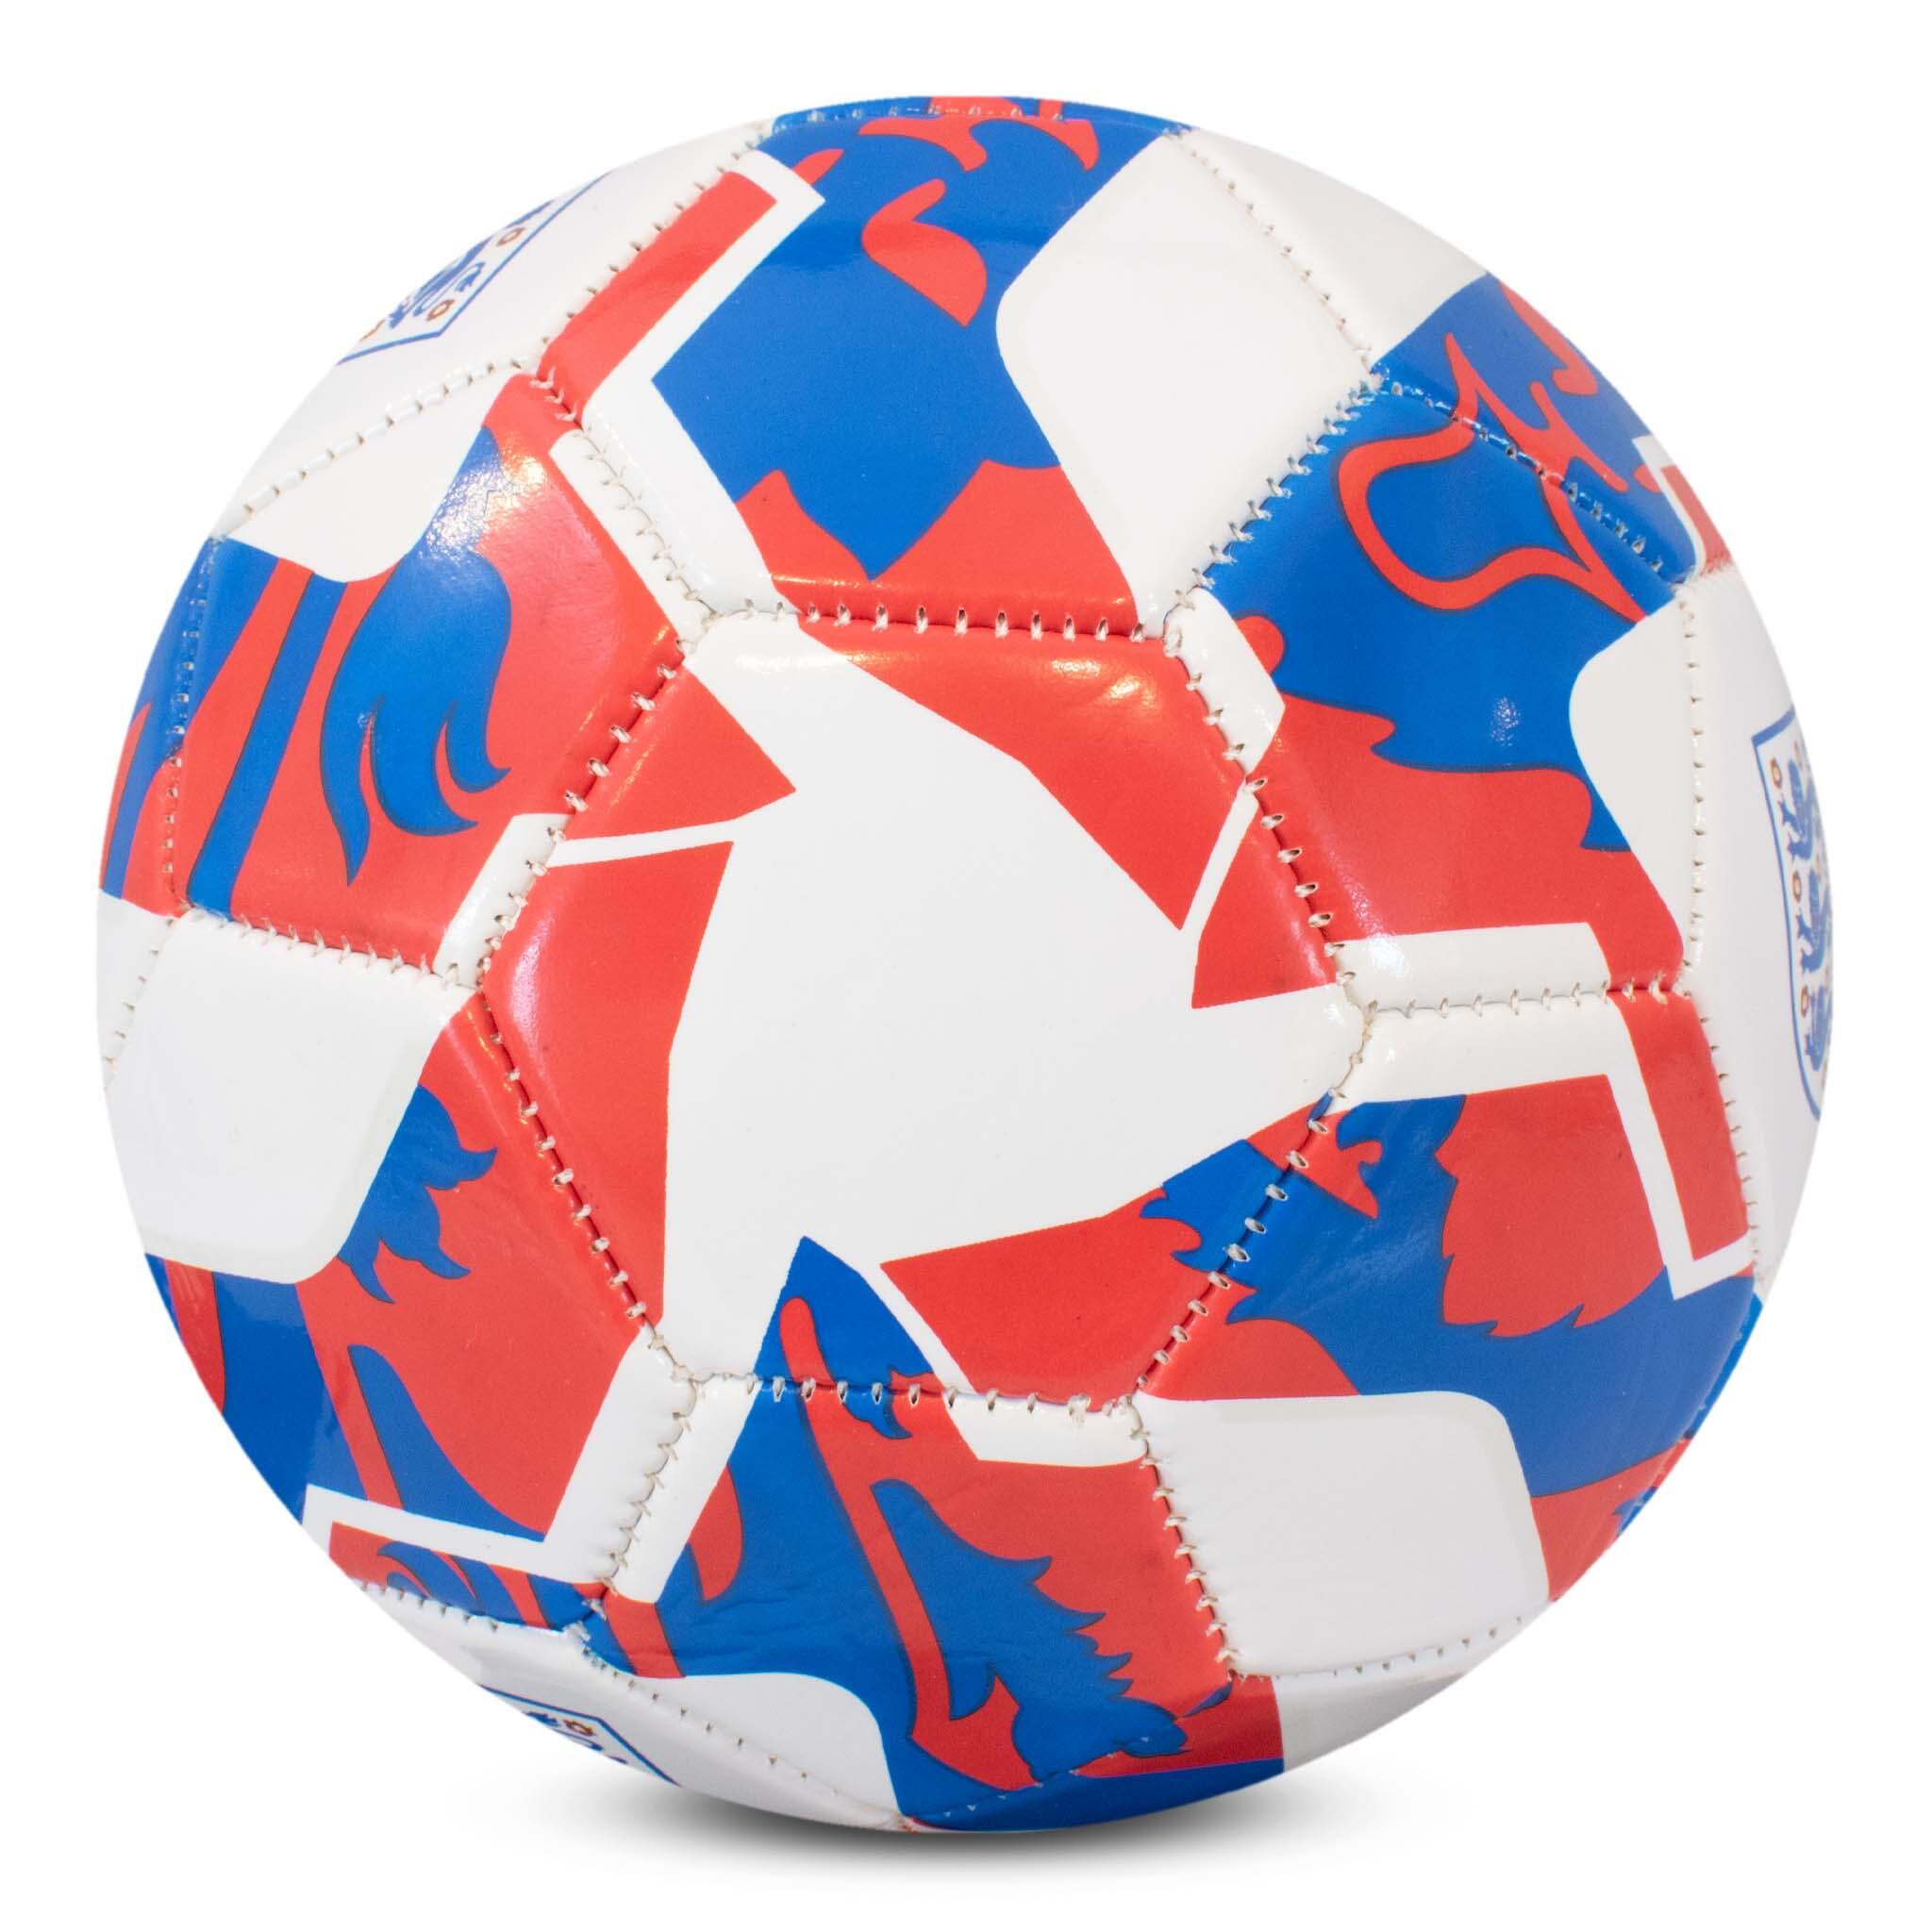 England Supporter Football Size 1 White Blue Red 4/4